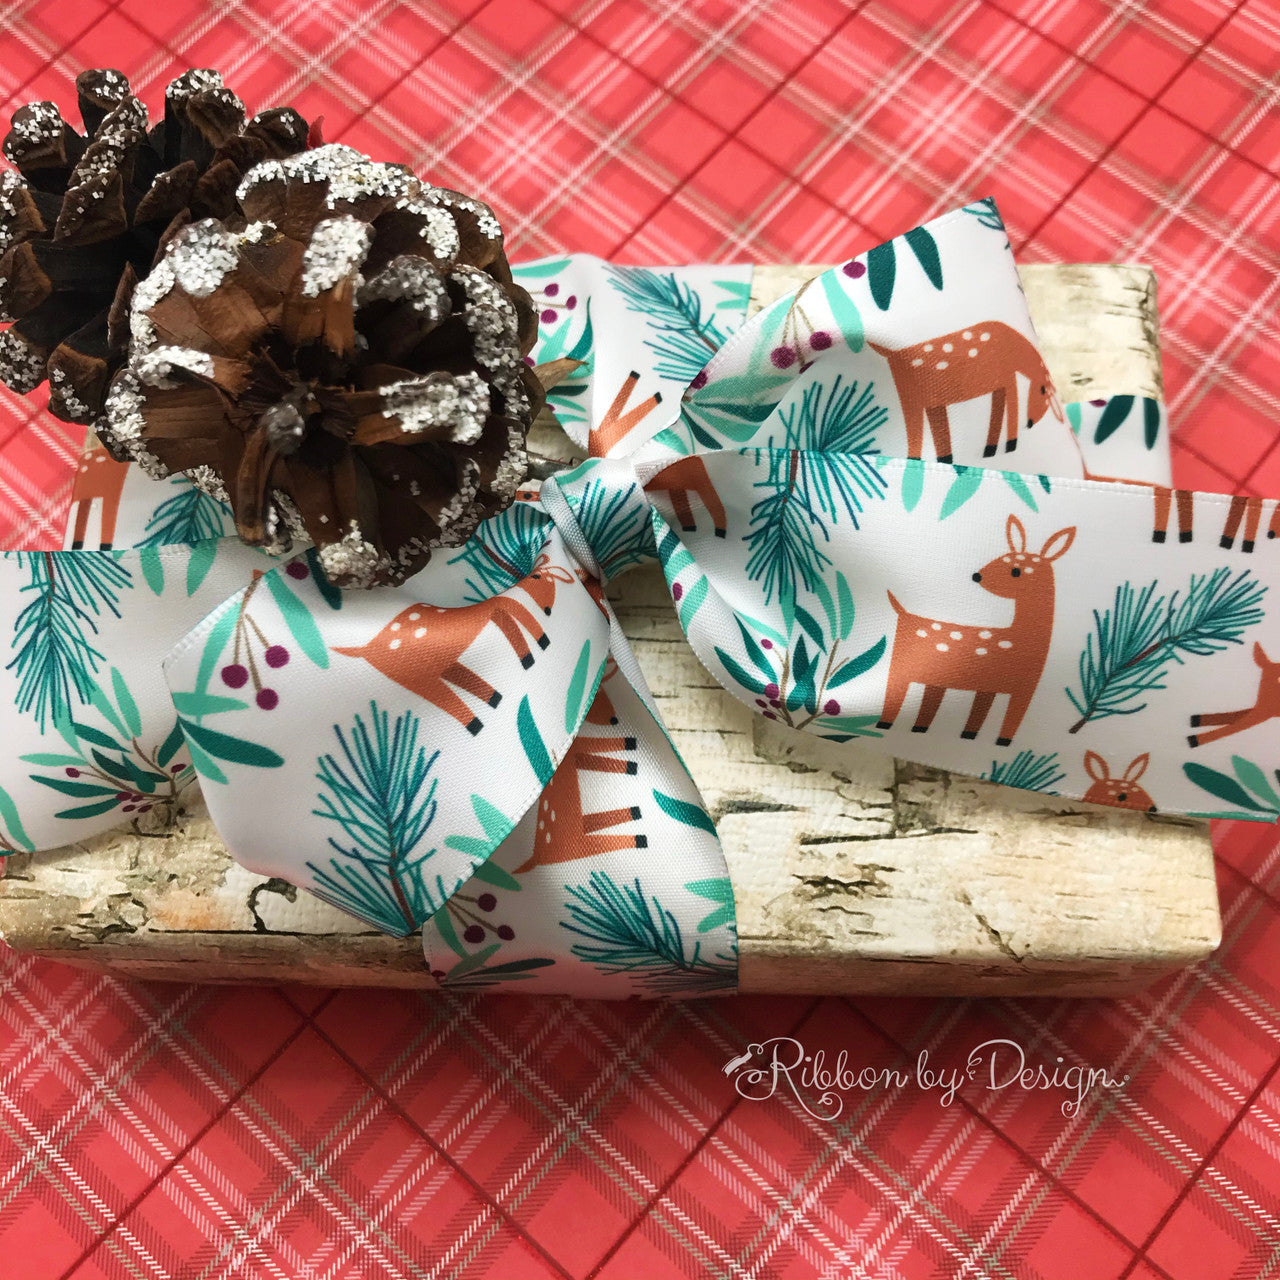 Add a pine cone to this sweet gift for the perfect holiday package!